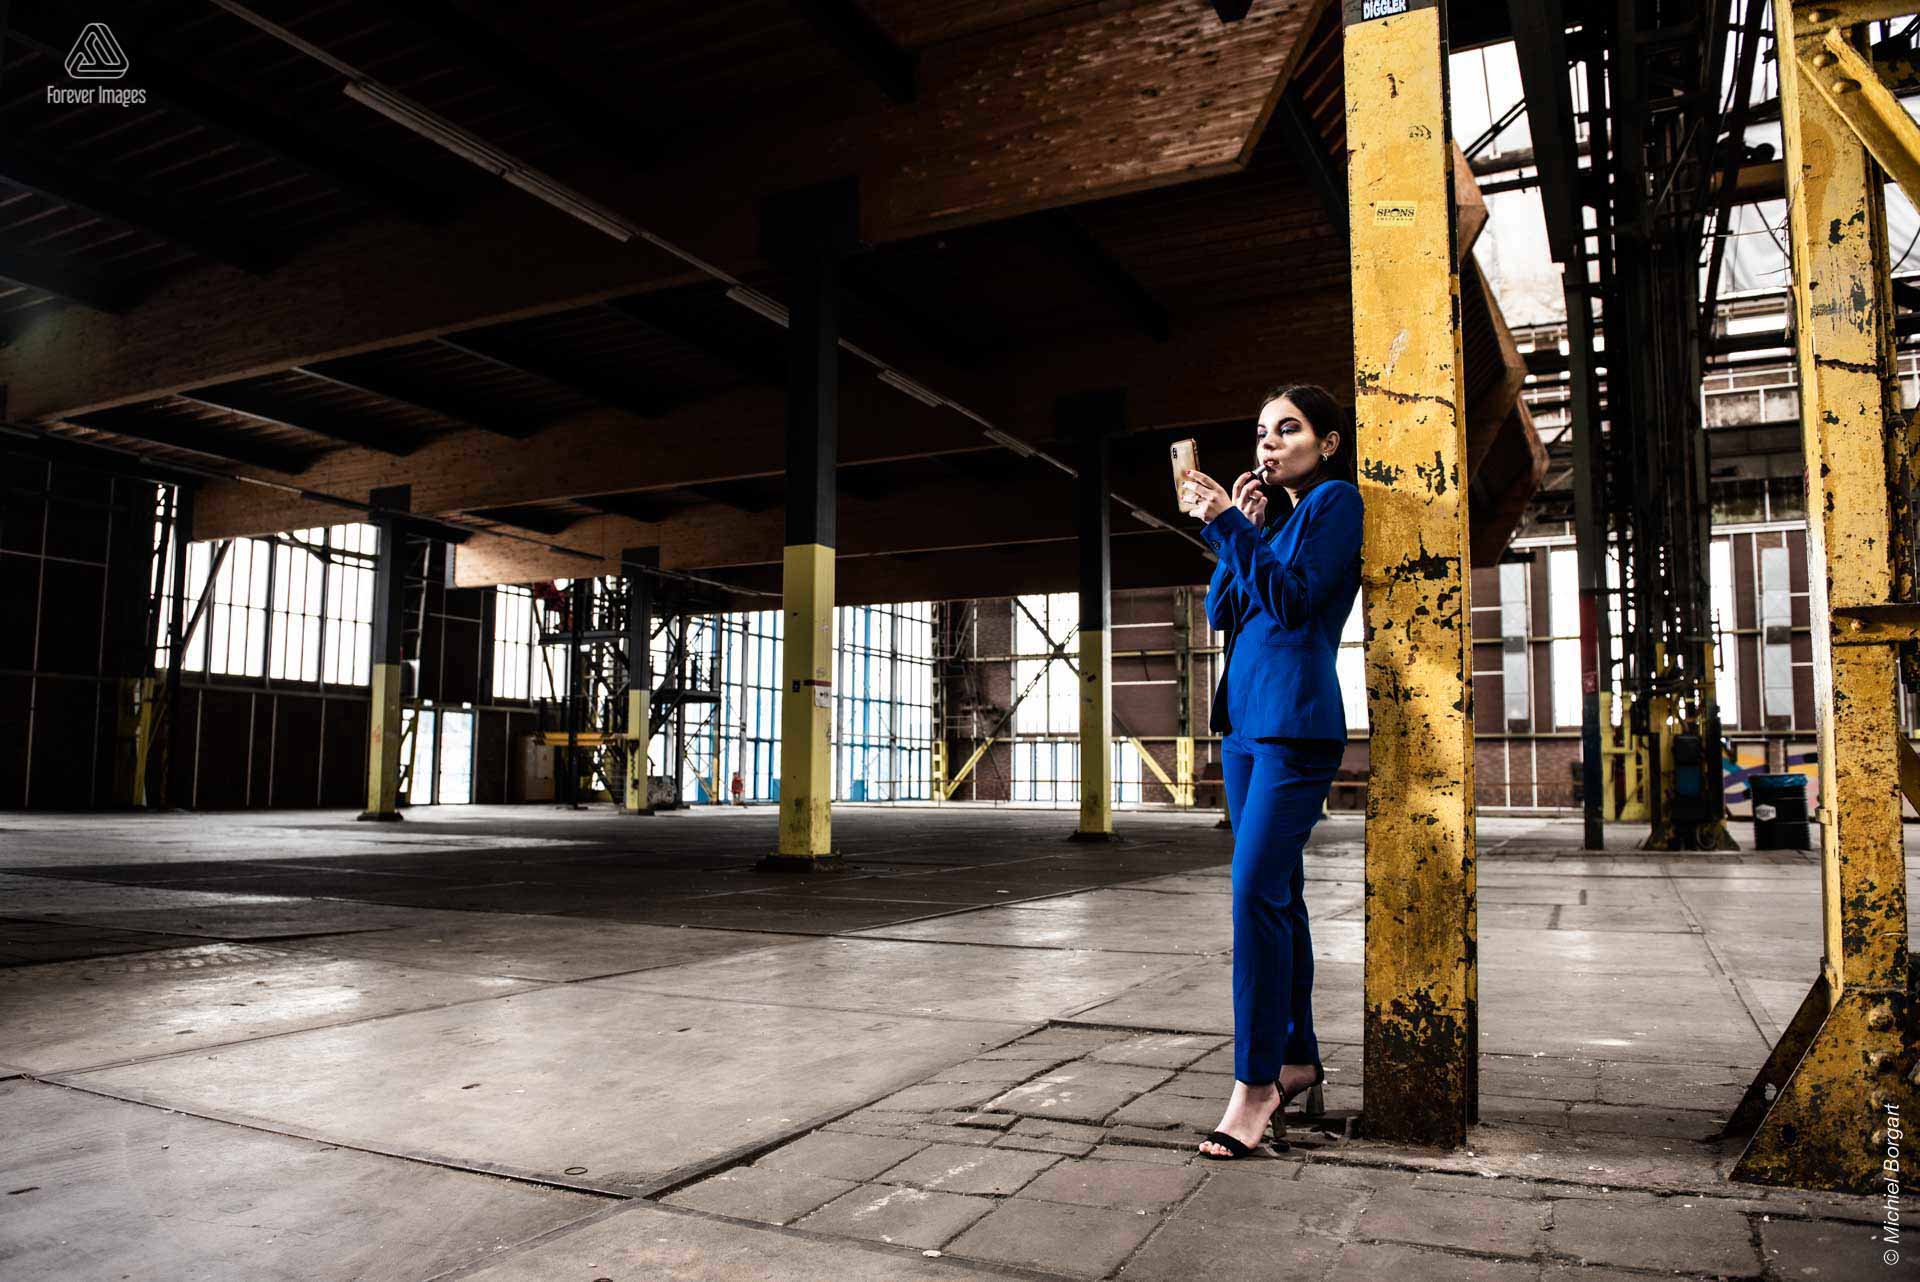 Portrait photo lady in blue suit is getting ready | Isis Vaandrager NDSM Werf Amsterdam | Portrait Photographer Michiel Borgart - Forever Images.